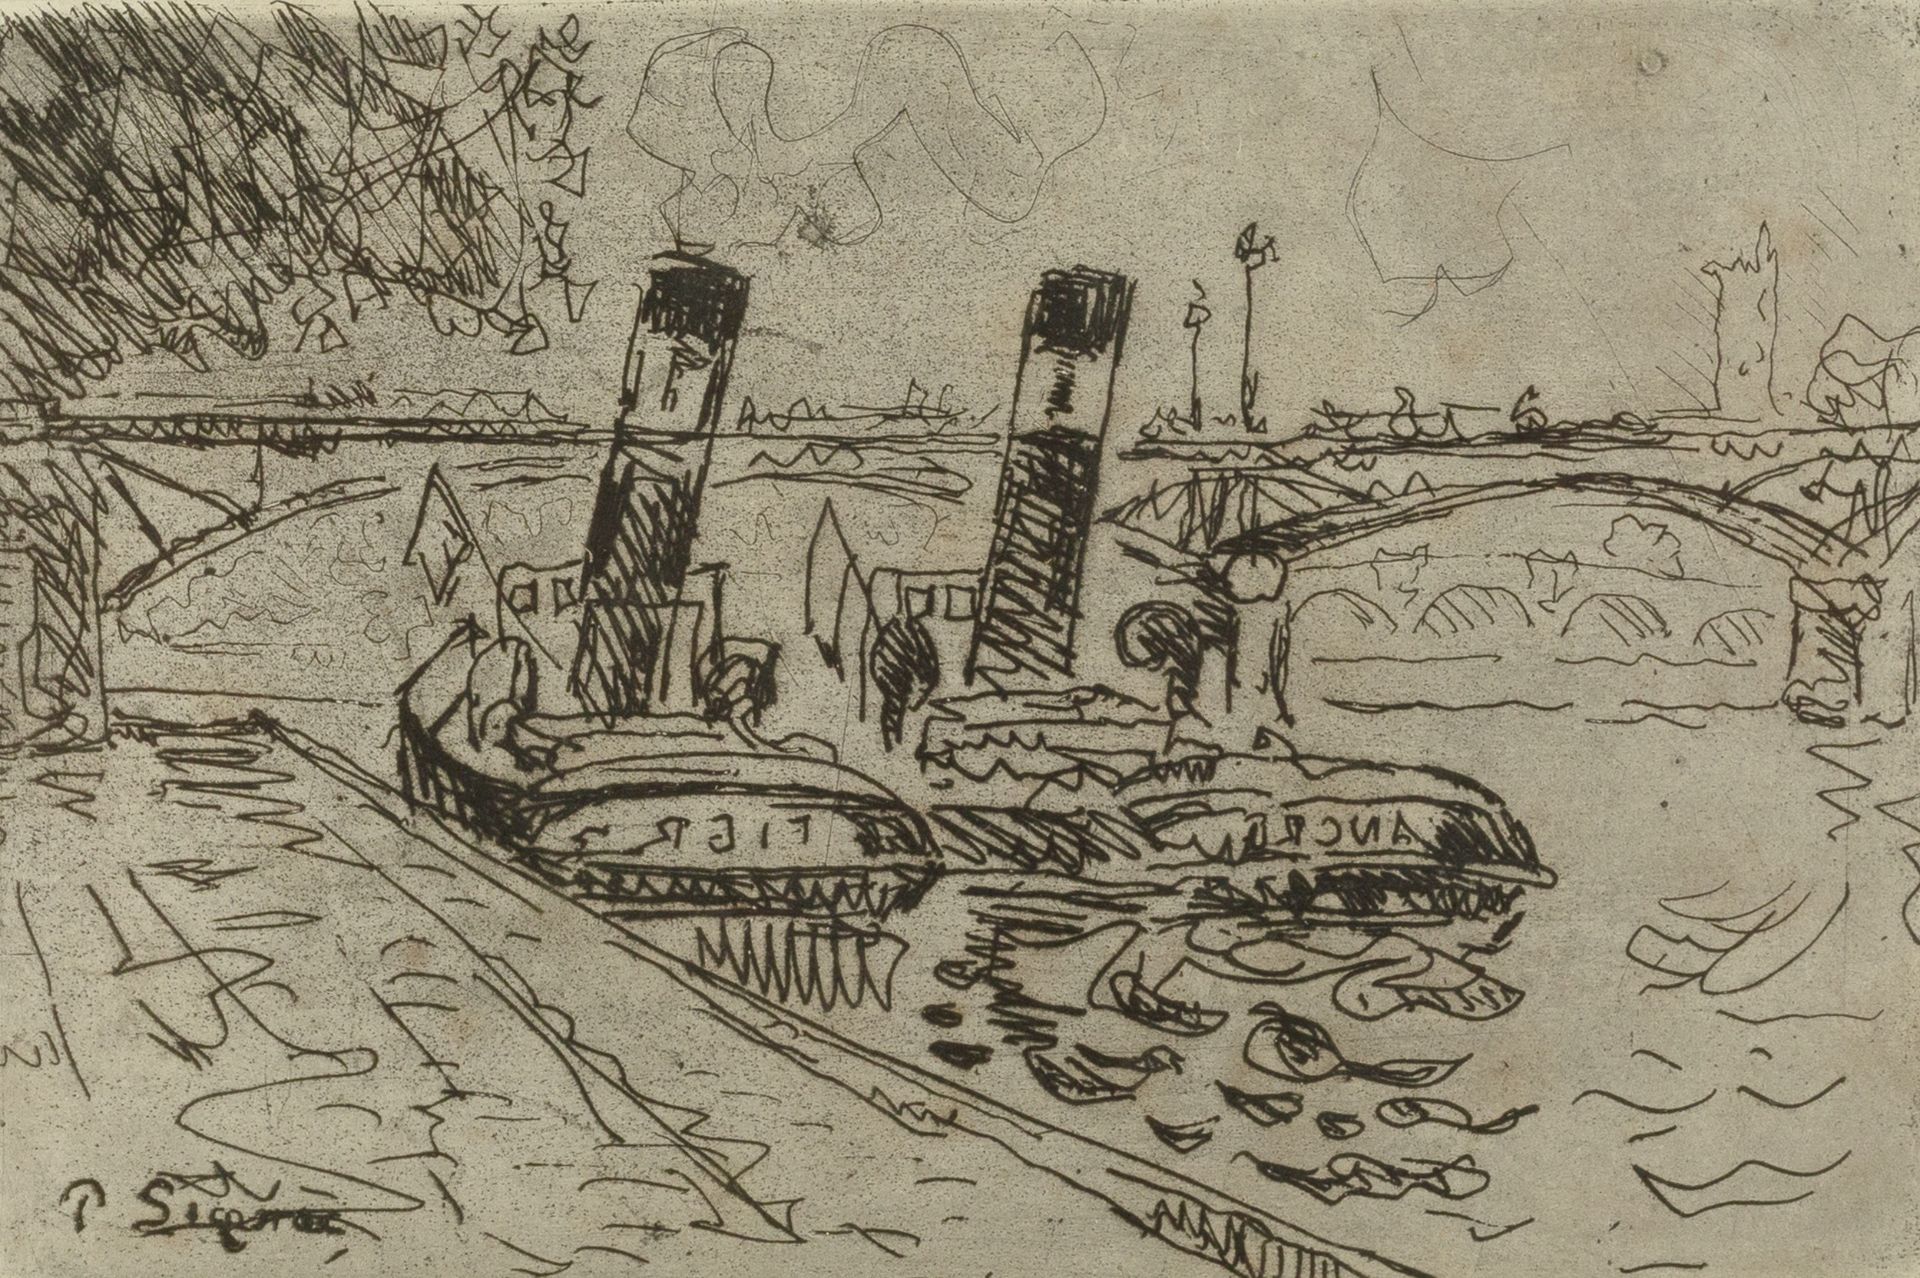 Paul Signac (1863-1935) Two tugboats on the river signed (in the plate) etching 25 x 36cm.